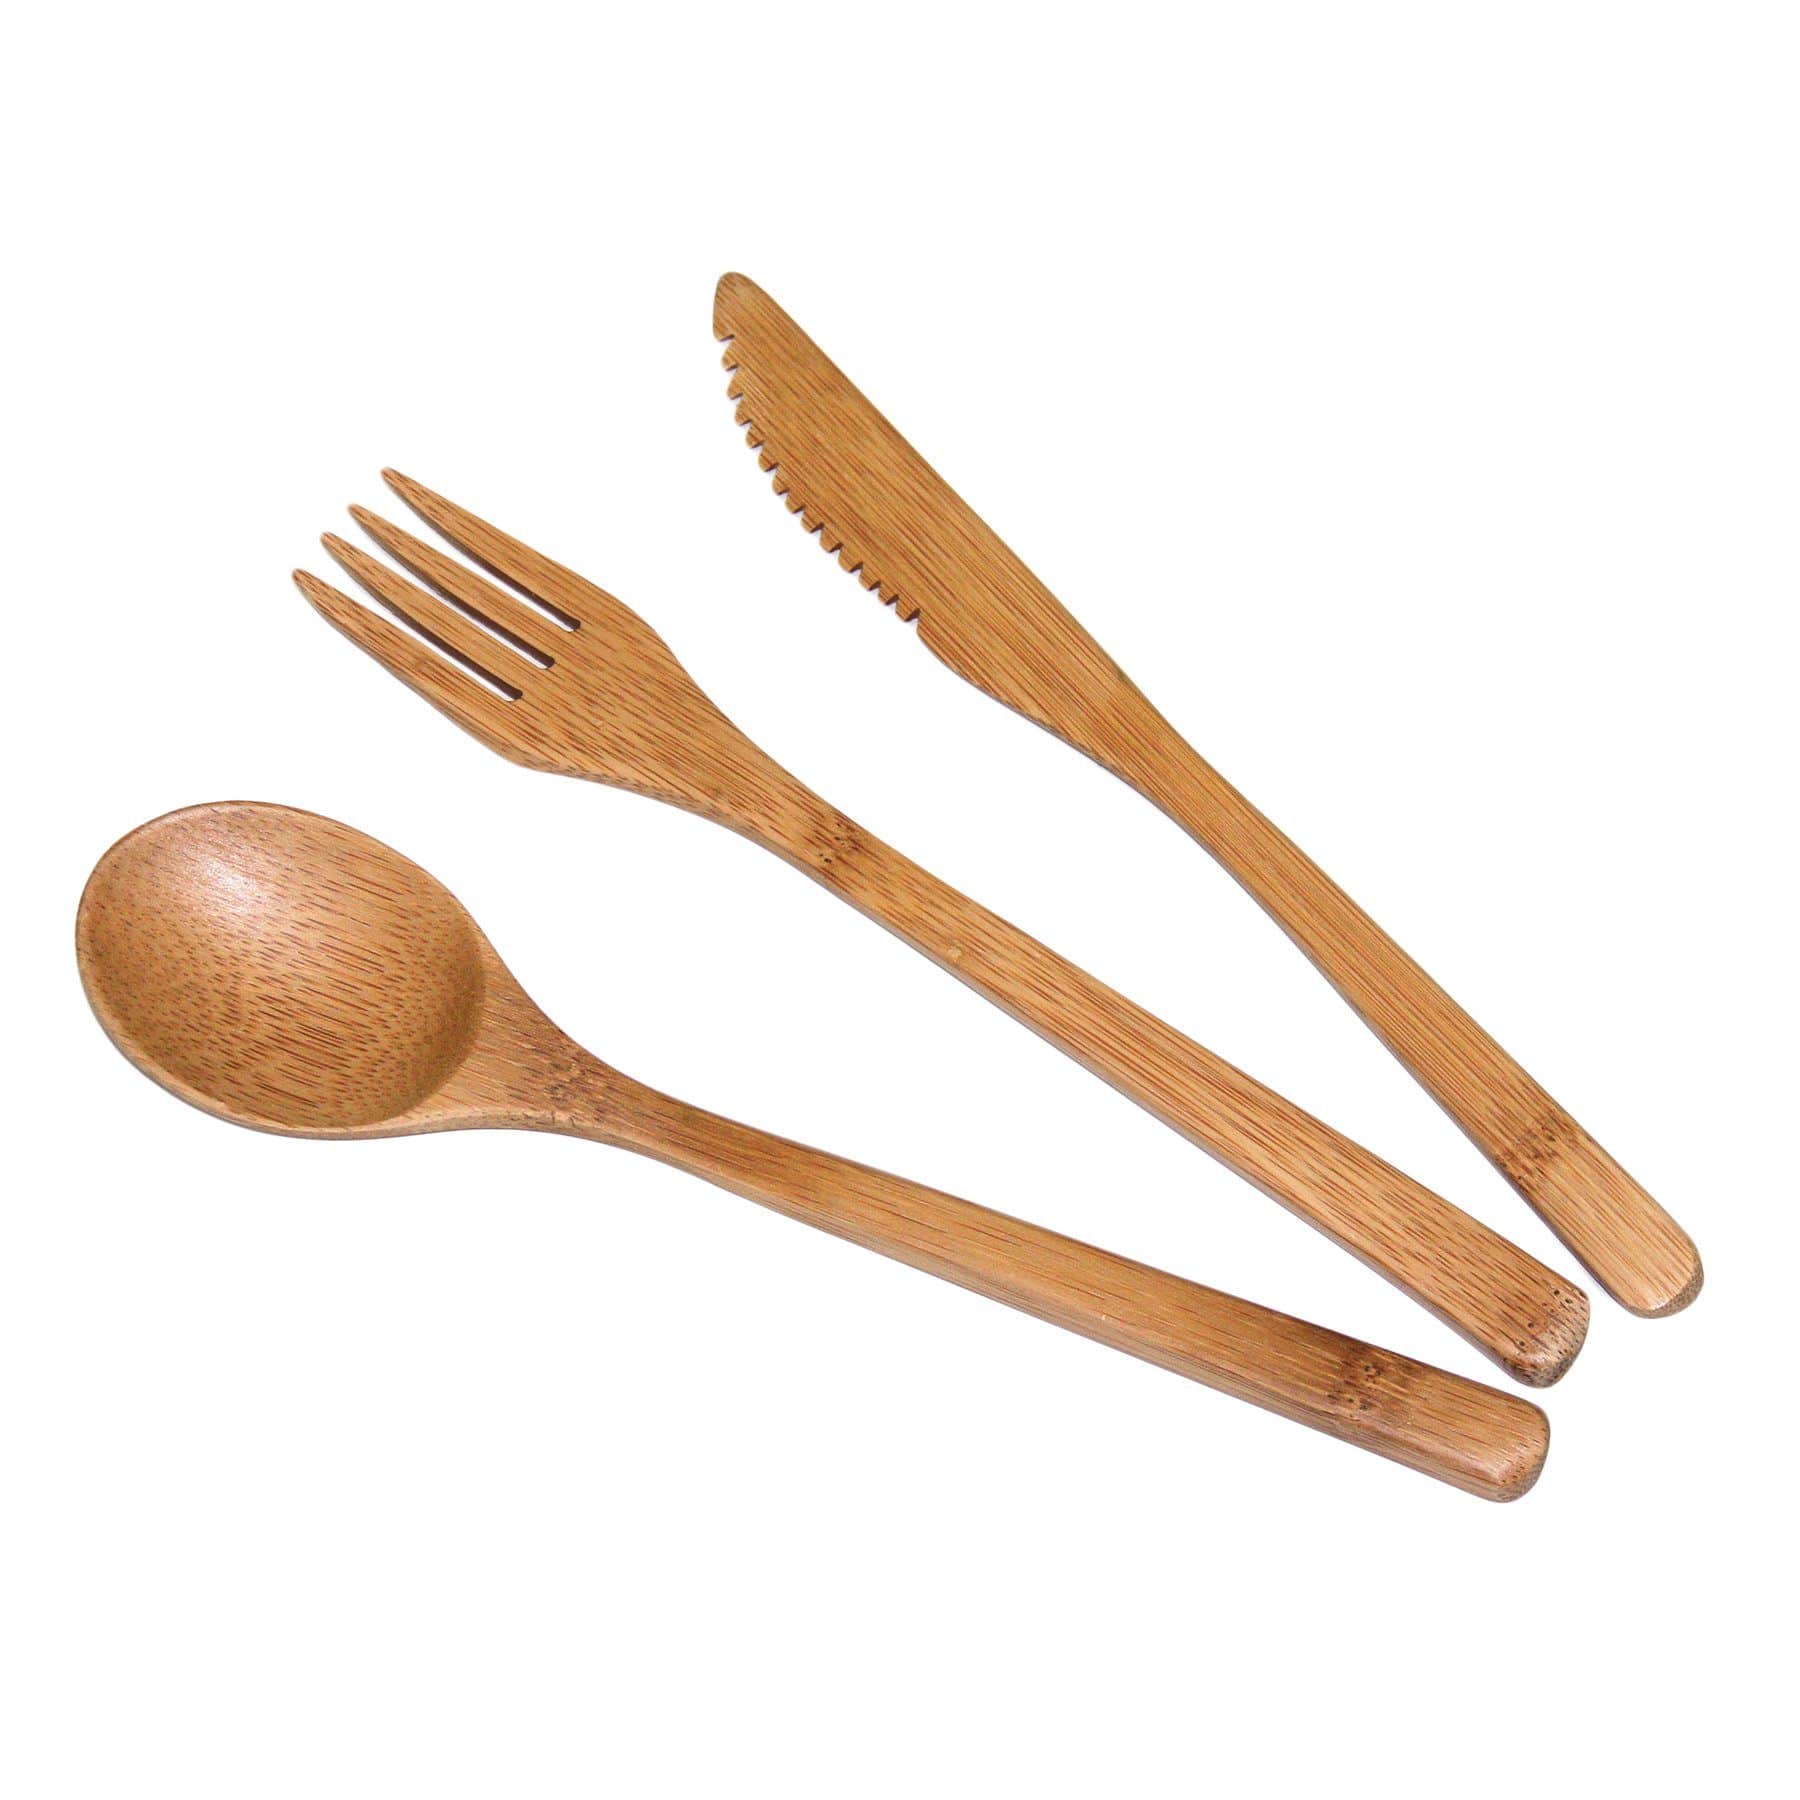 https://totallybamboo.com/cdn/shop/products/3-piece-reusable-flatware-set-fork-spoon-and-knife-totally-bamboo-403122.jpg?v=1628107444